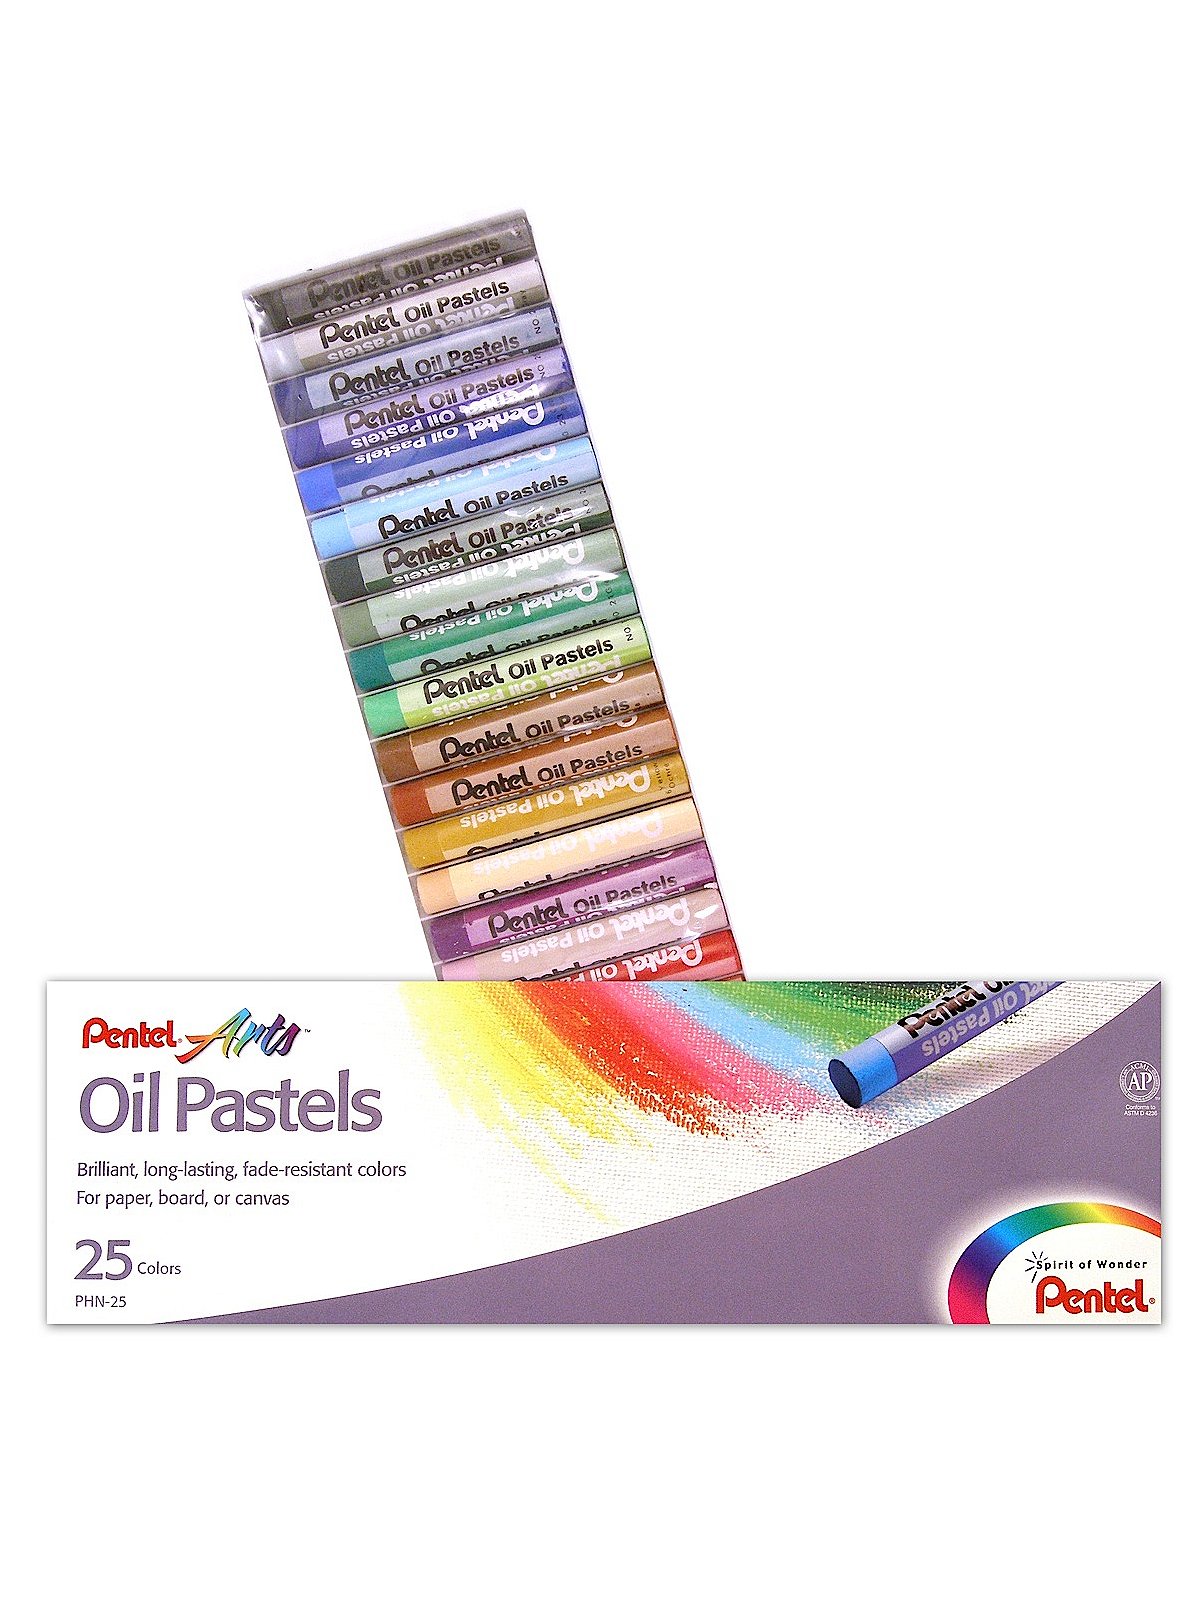 A Brief Introduction to Oil Pastels